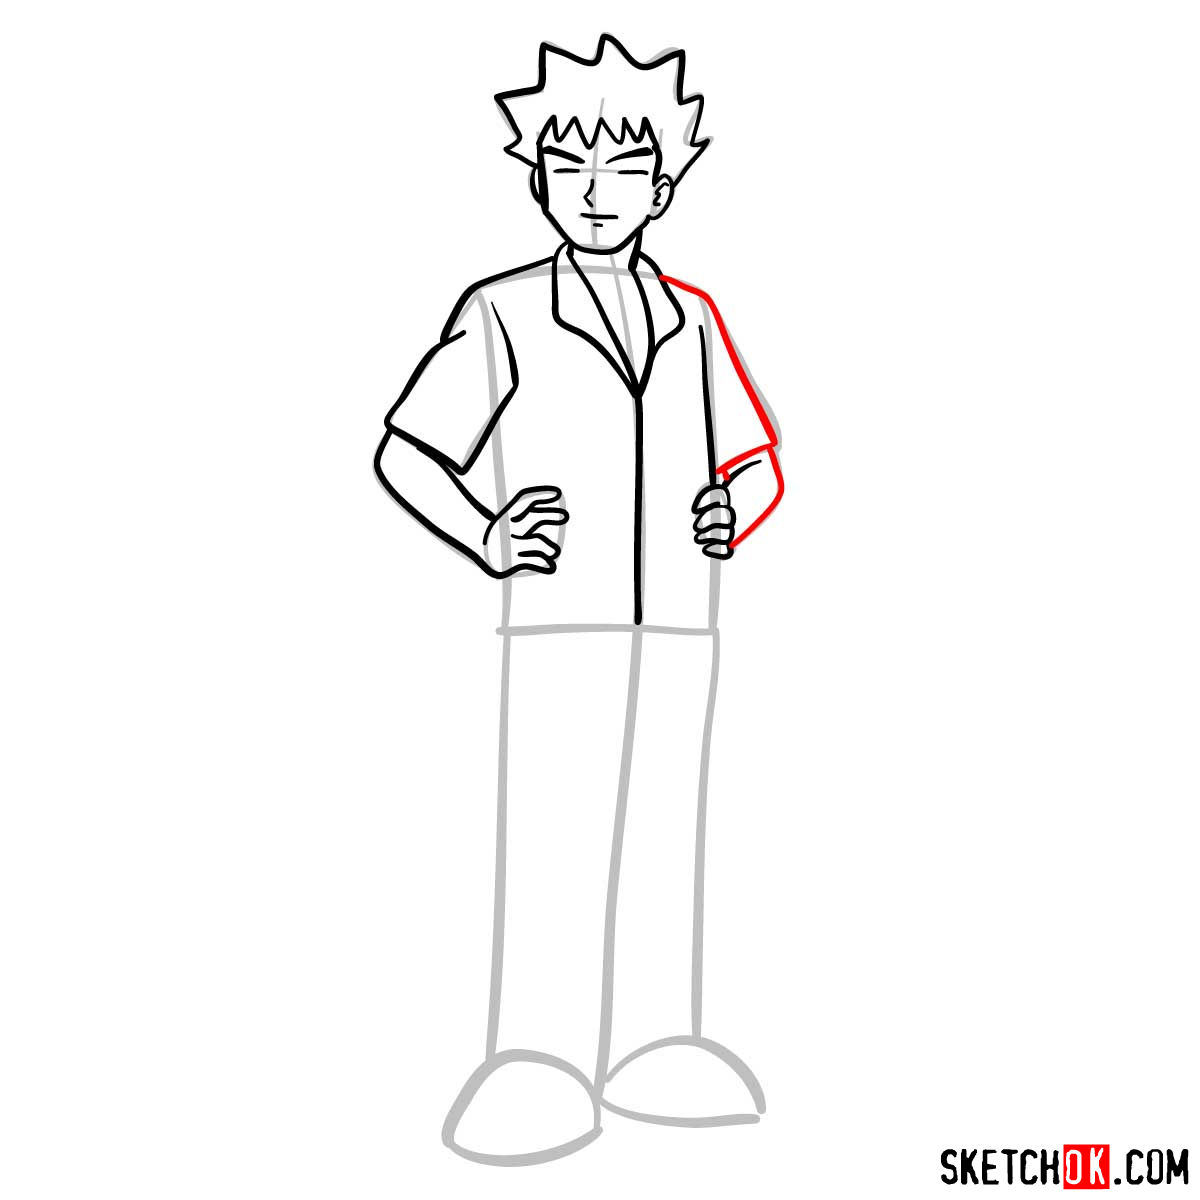 How to draw Brock from Pokemon anime - step 10